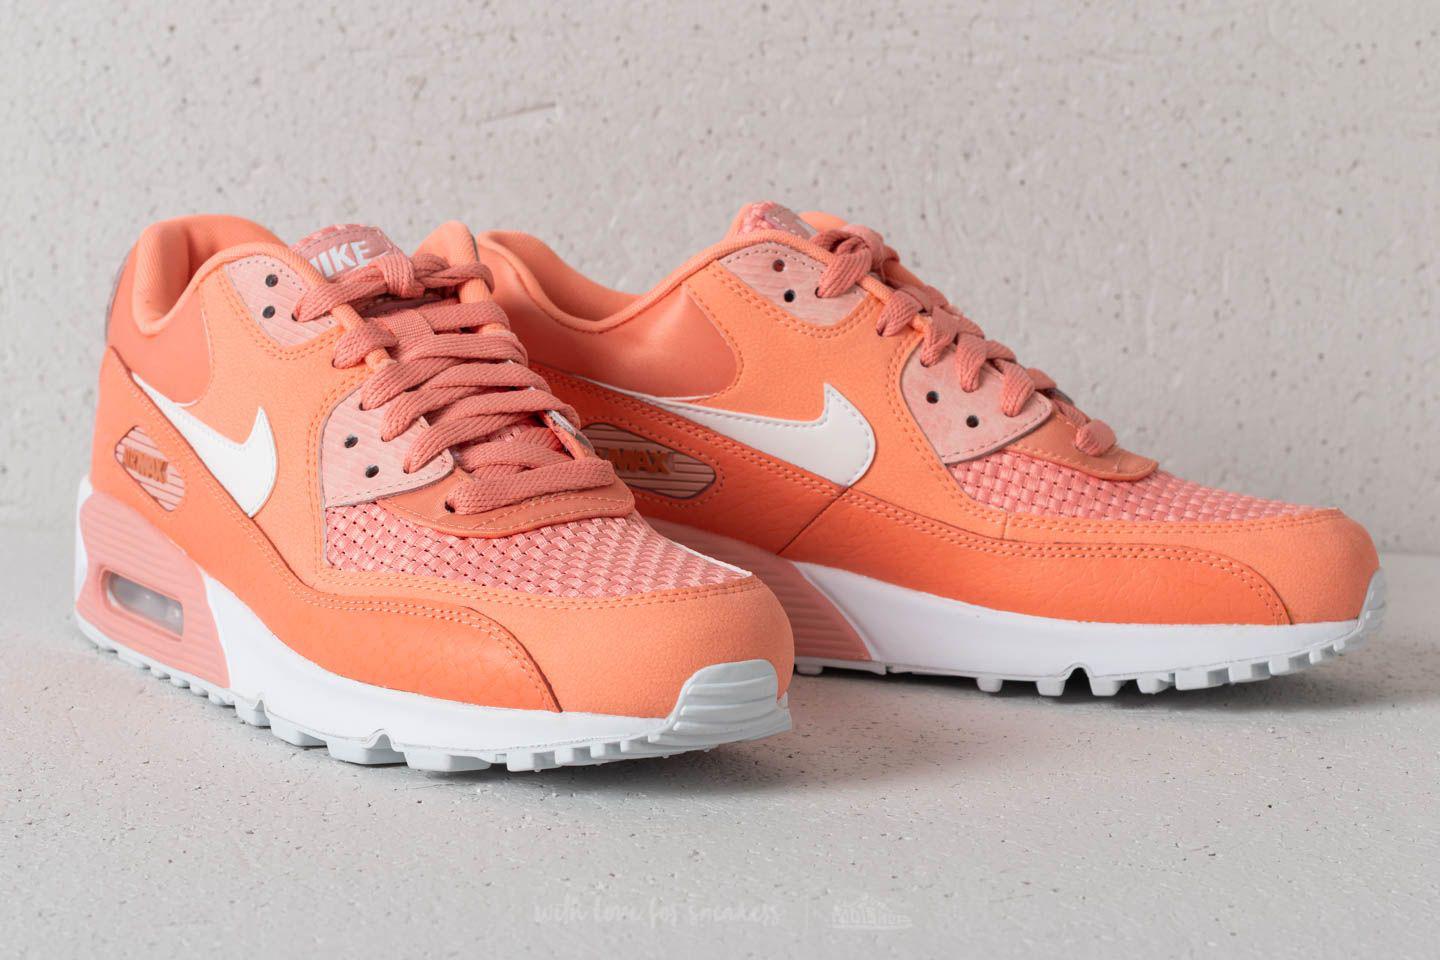 Nike Leather Wmns Air Max 90 Se Crimson Bliss/ White | Lyst